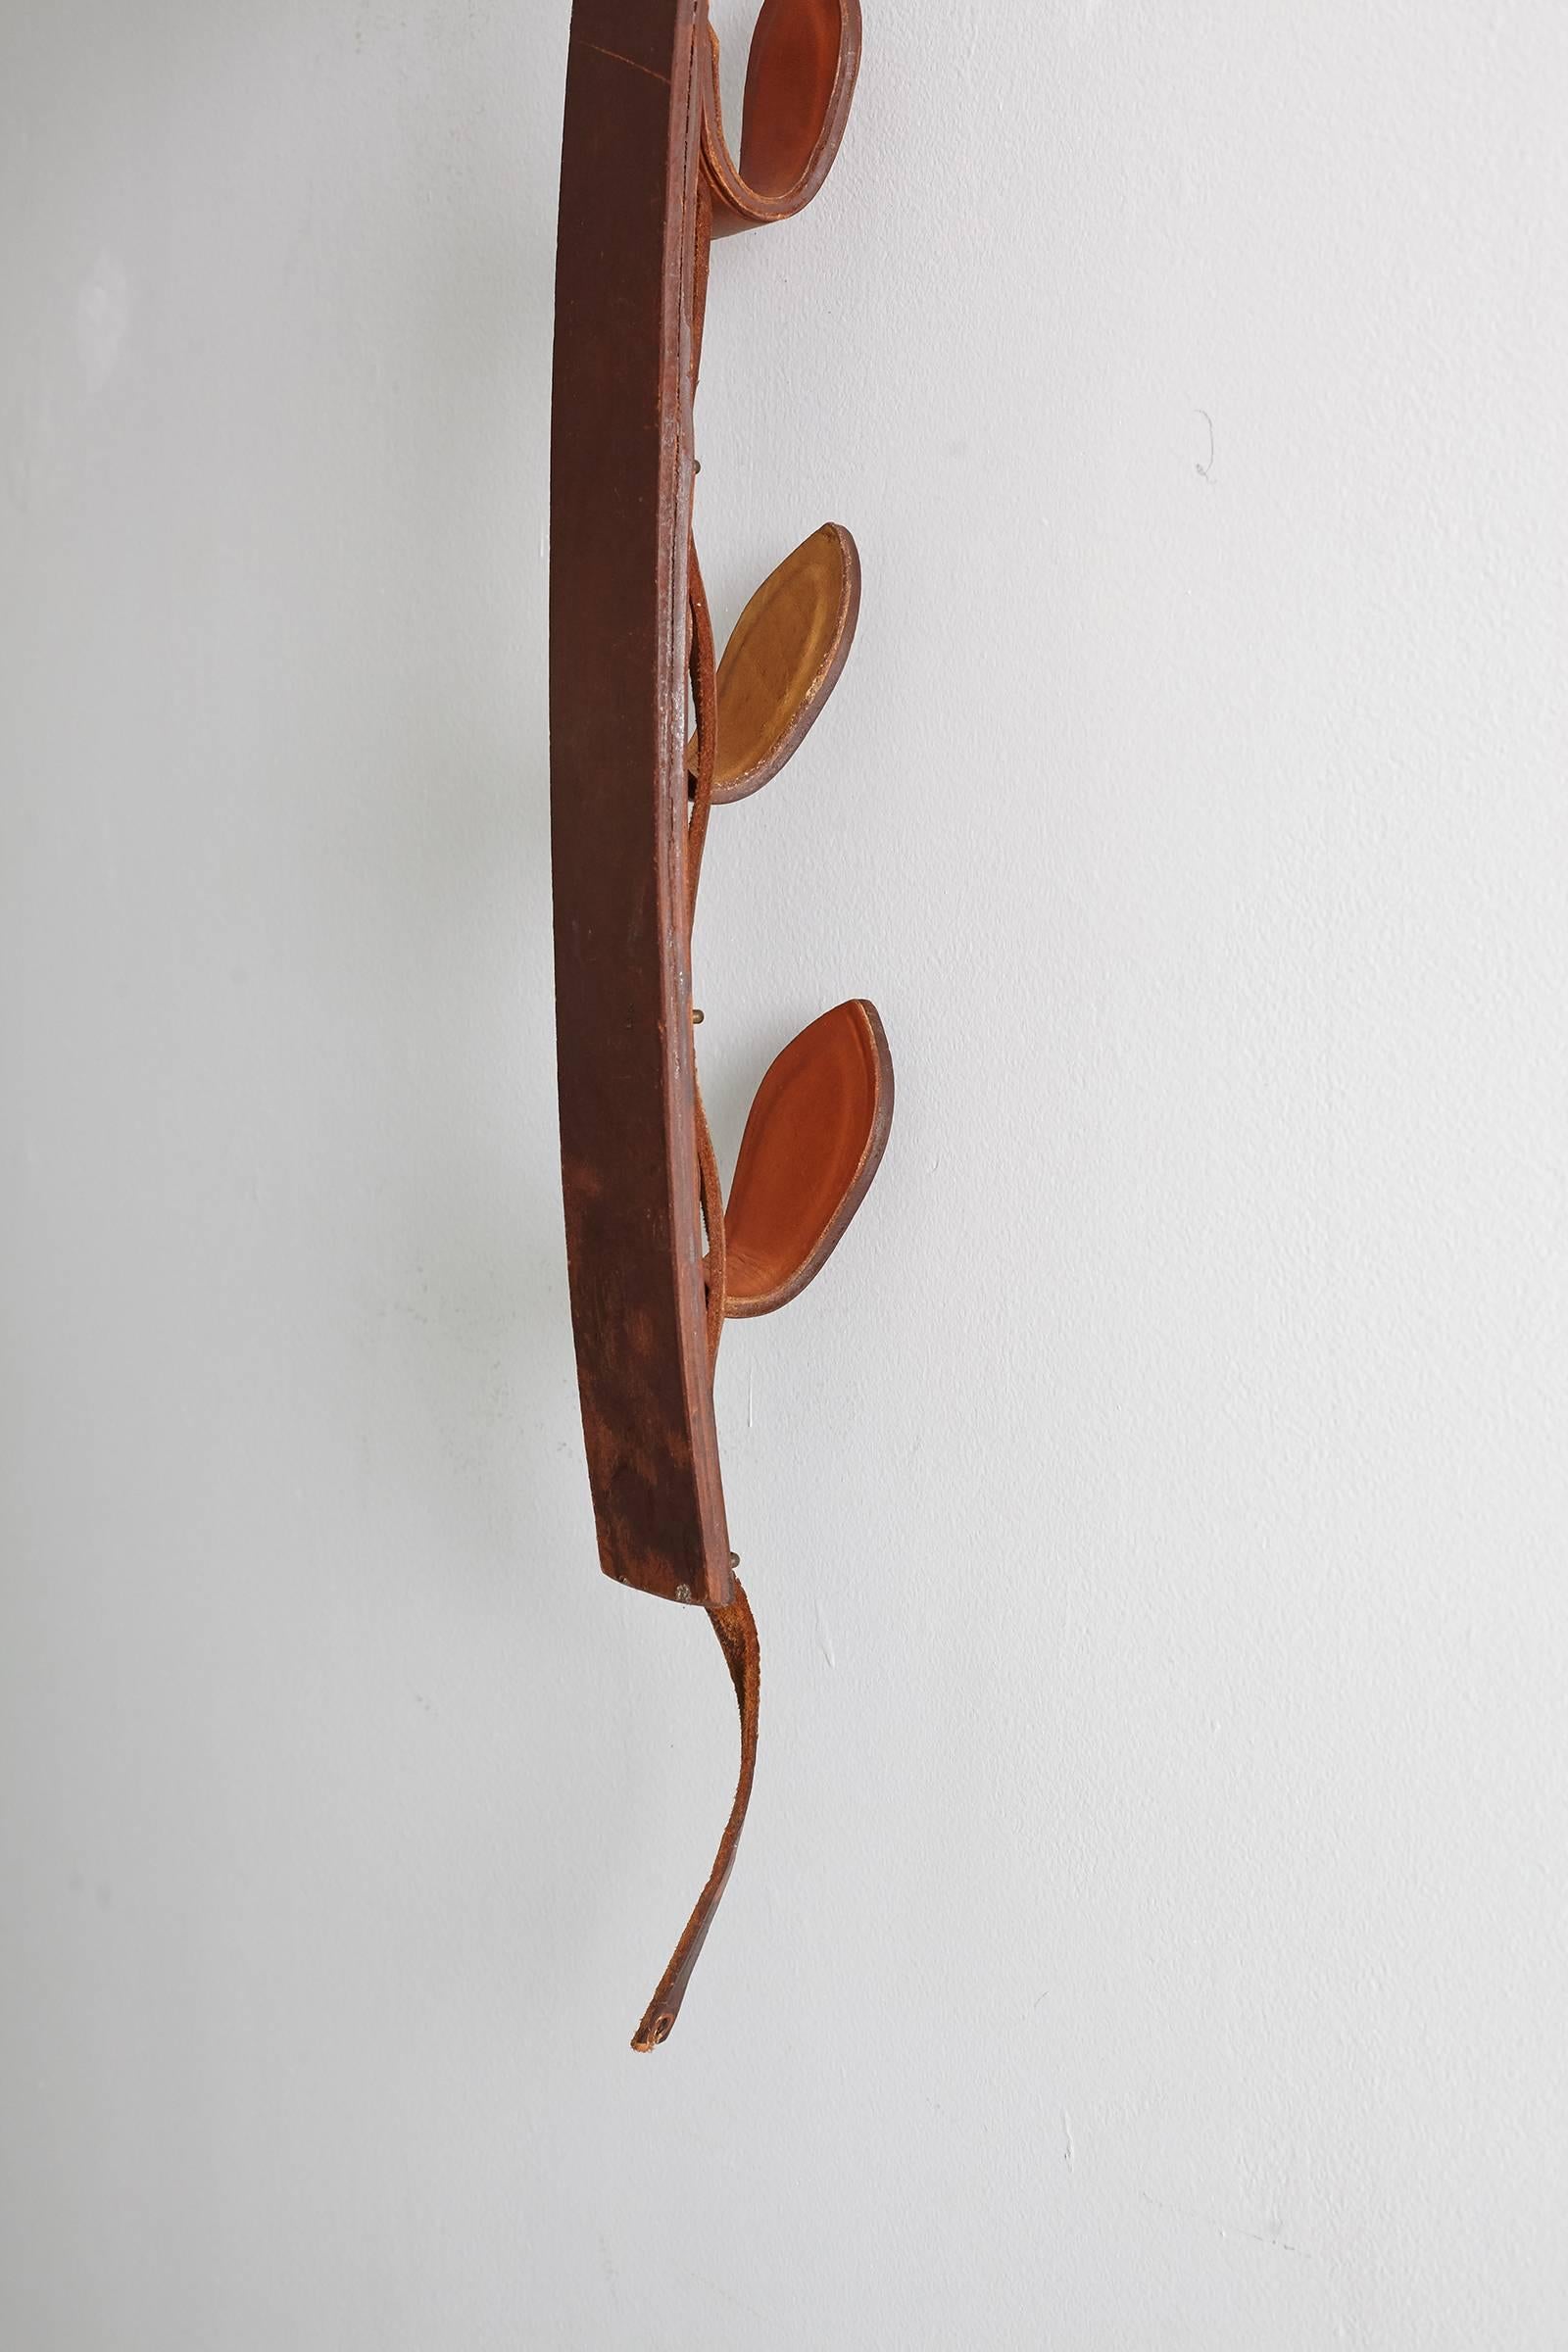 Jacques Adnet Leather Wall Hook For Sale 3